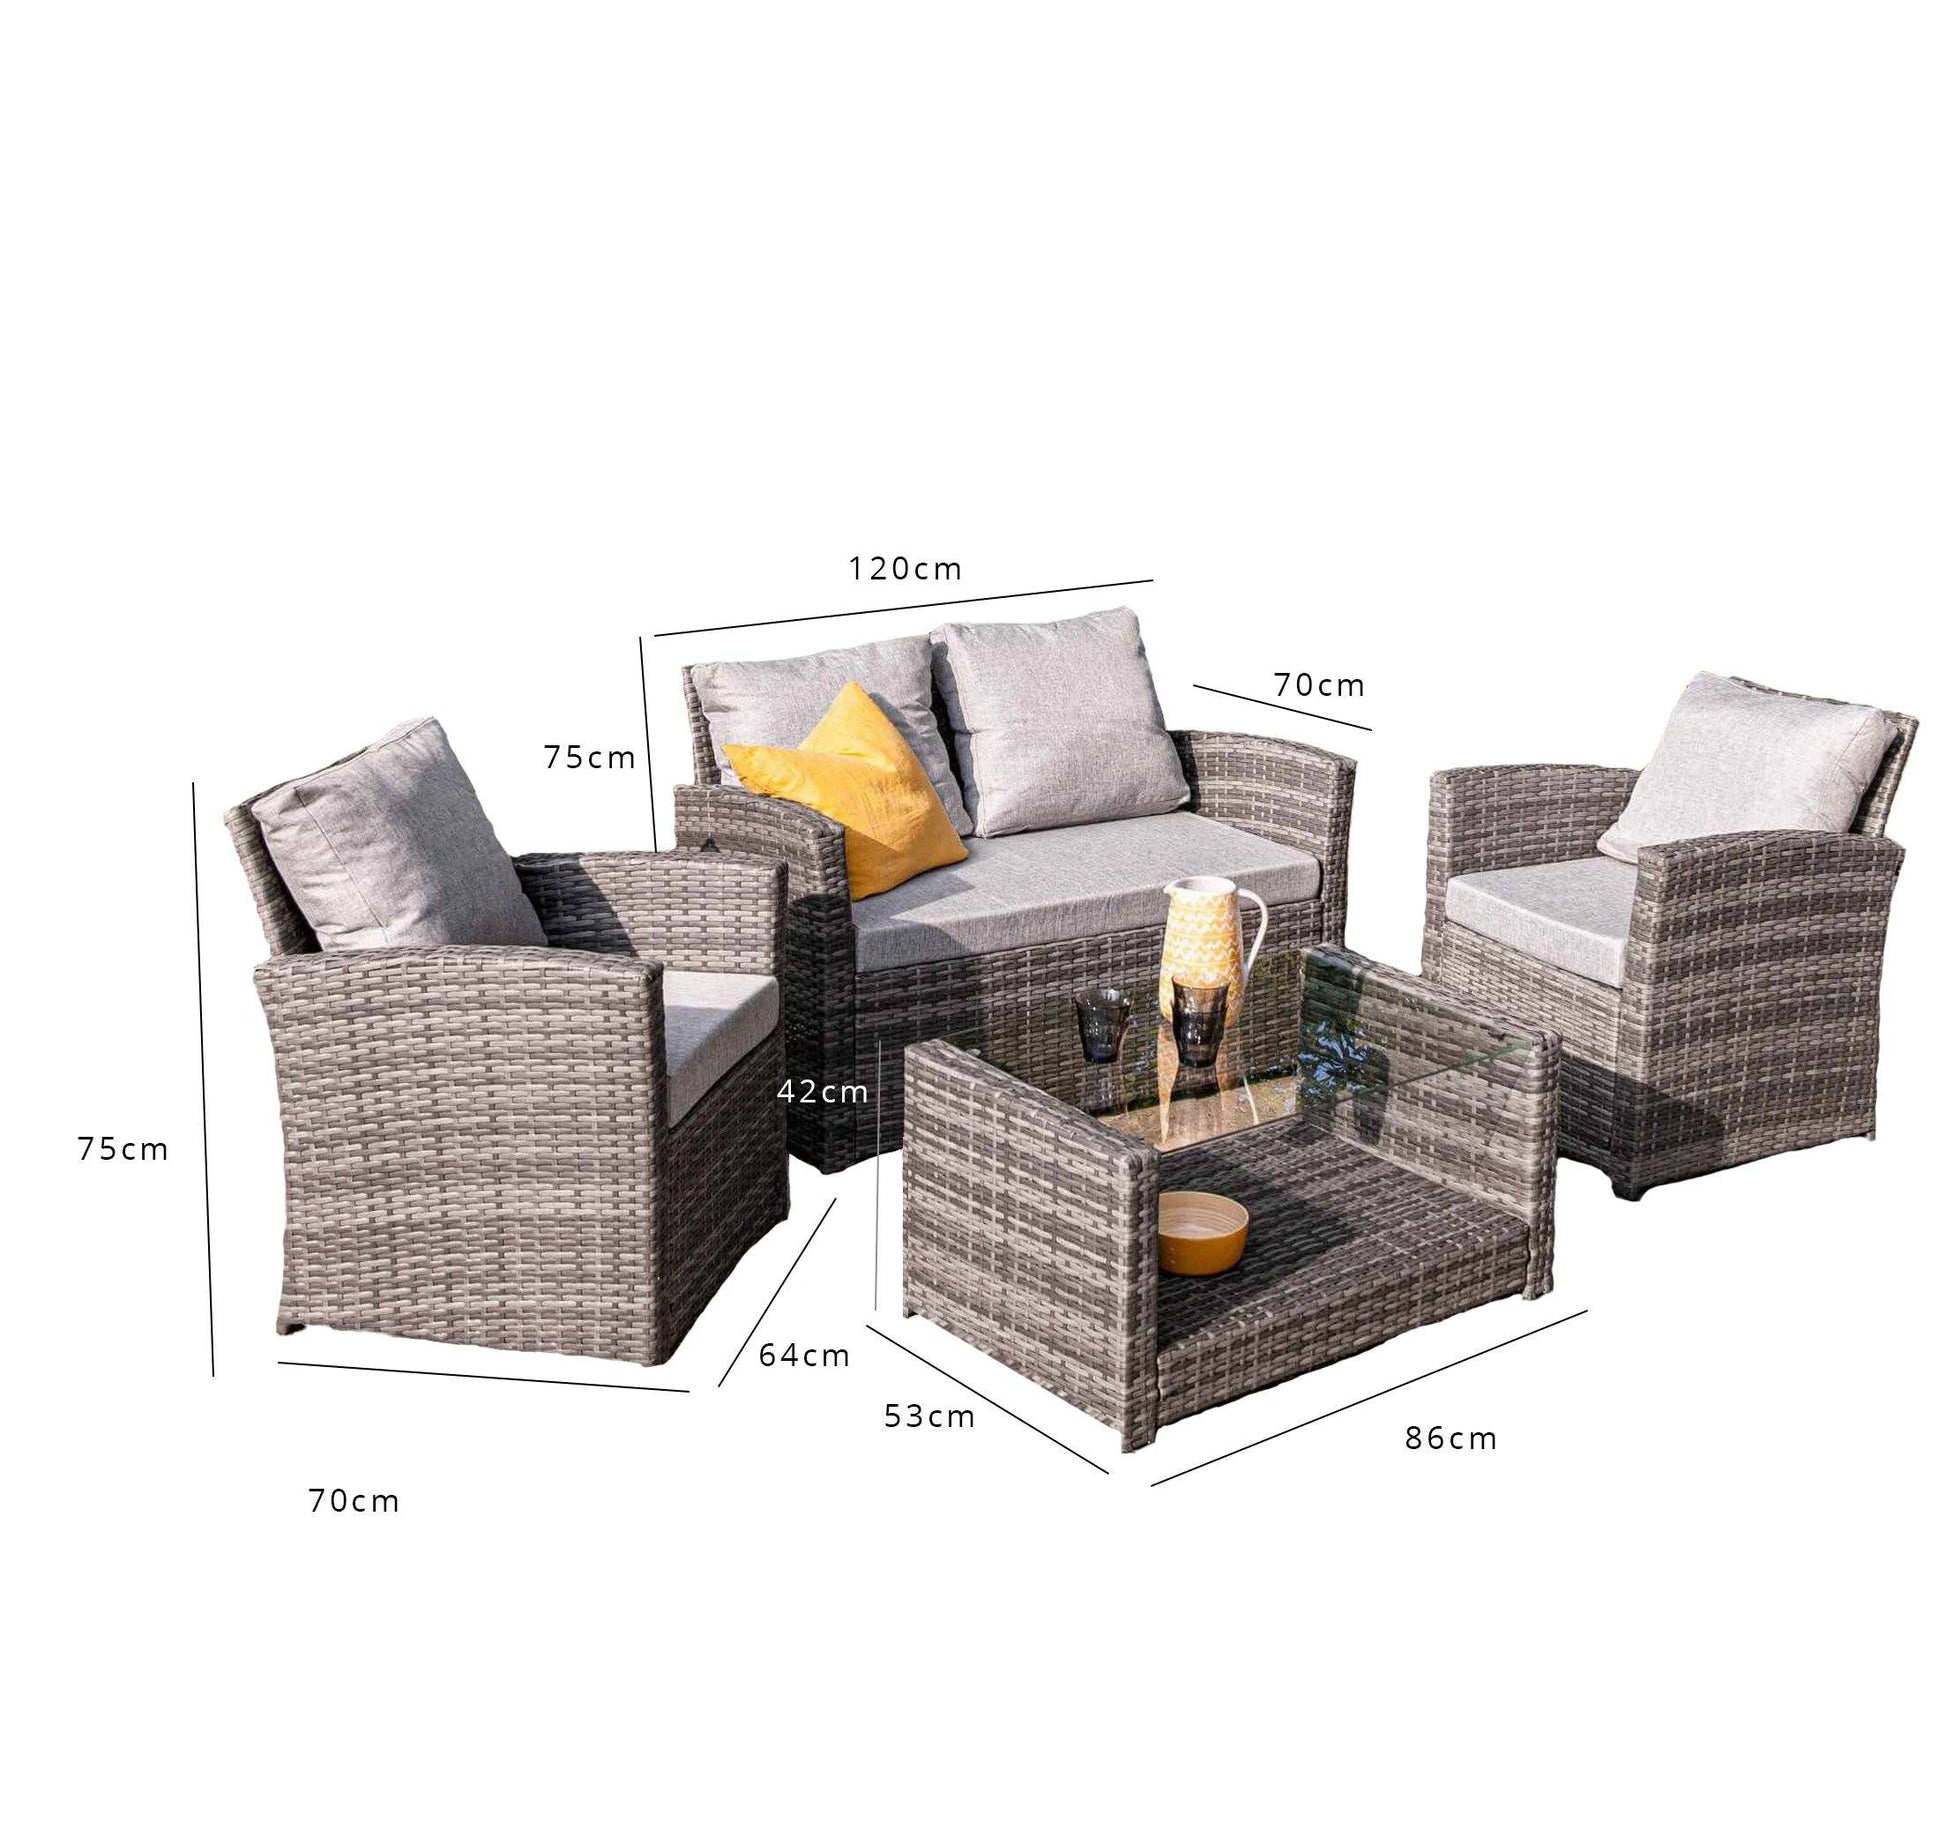 Rattan Garden Sofa Set - 4 Seater - Grey Weave - In Stock Date - 17th July 2020 - Laura James